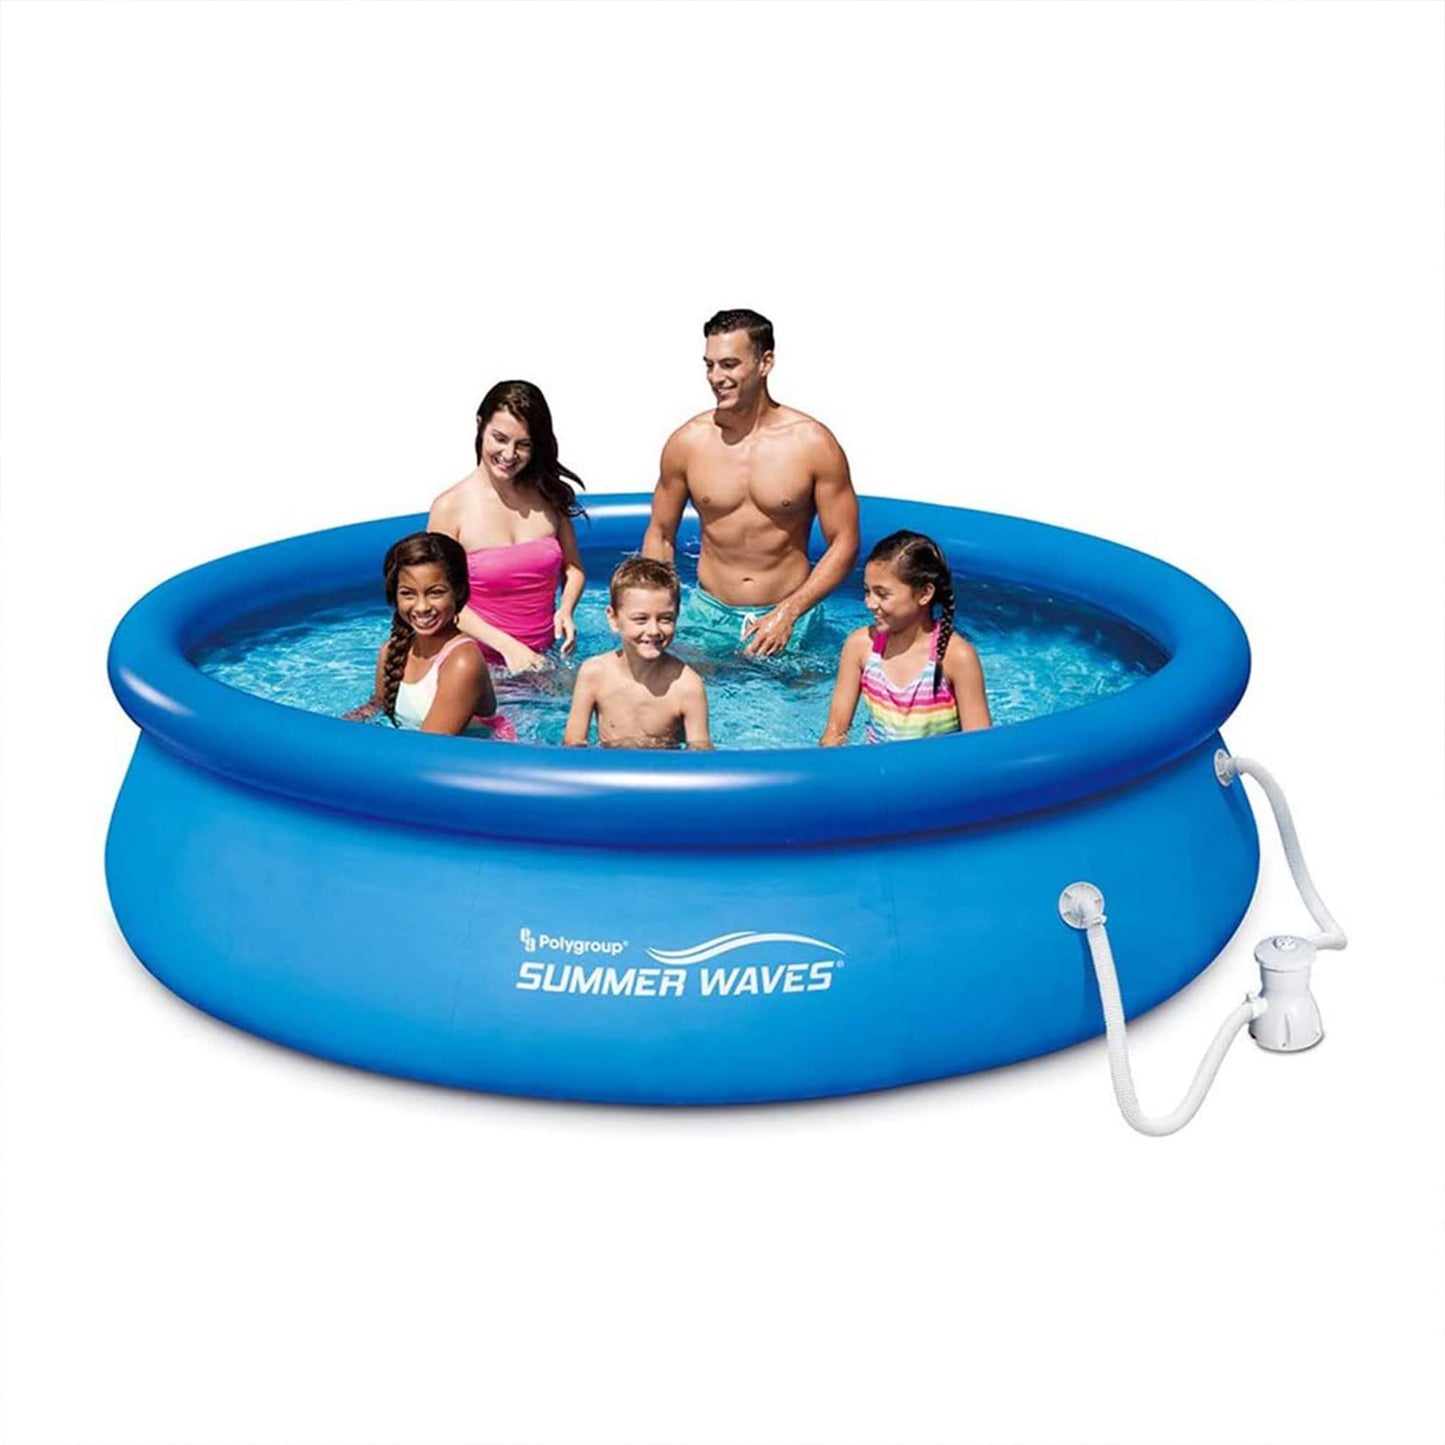 Summer Waves P1001030A Quick Set 10ft x 2.5ft Outdoor Inflatable Ring Above Ground Outdoor Swimming Pool with GFCI Model RX300 Filter Pump System, Blue 10 foot